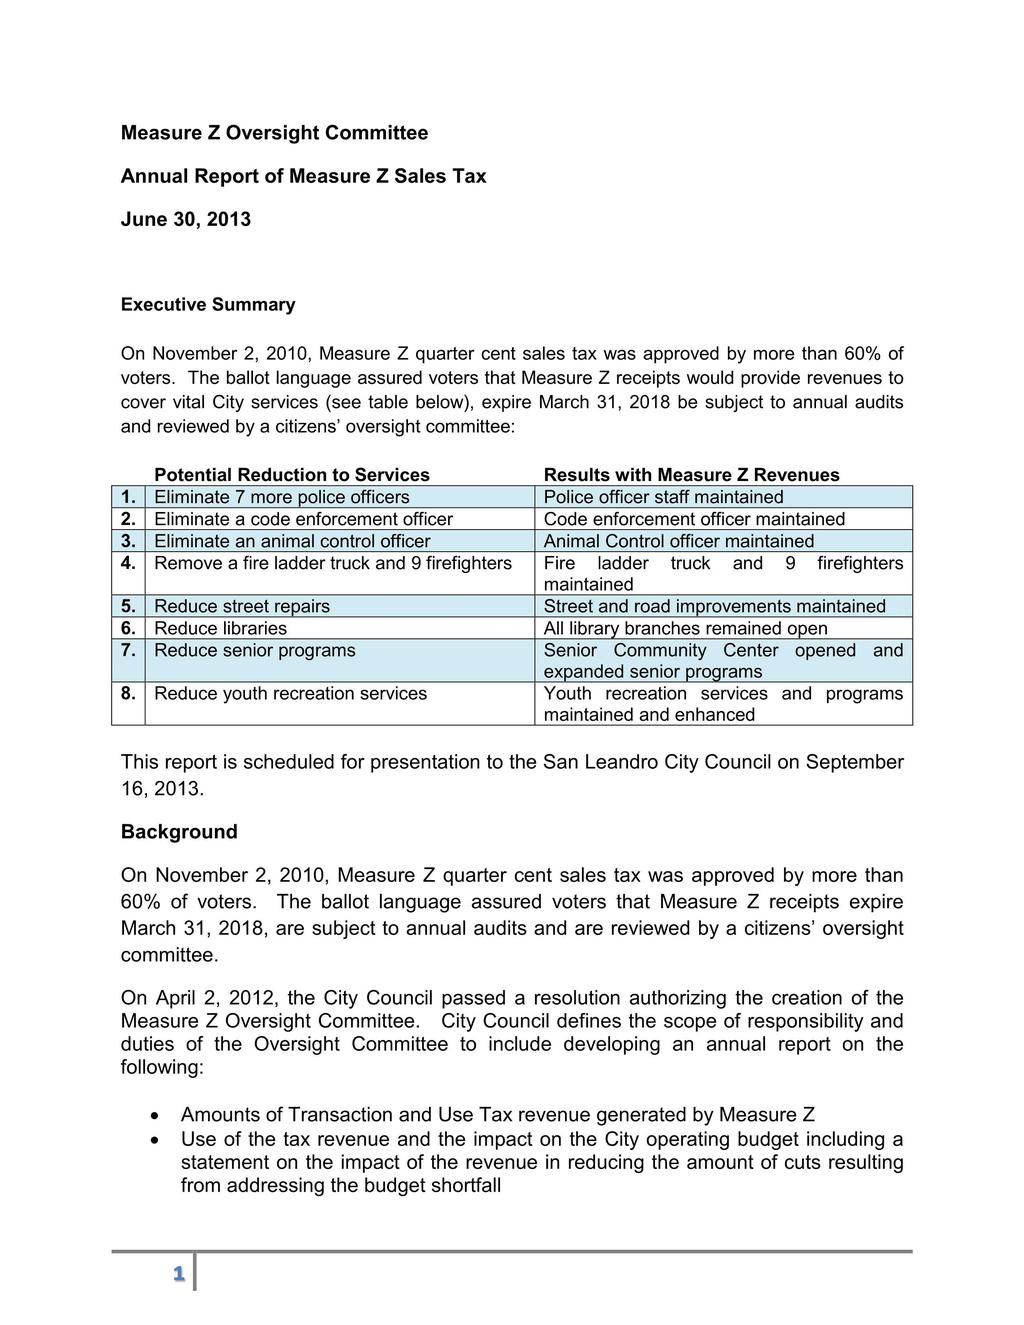 Measure Z Oversight Committee Annual Report of Measure Z Sales Tax June 30, 2013 Executive Summary On November 2, 2010, Measure Z quarter cent sales tax was approved by more than 60% of voters.